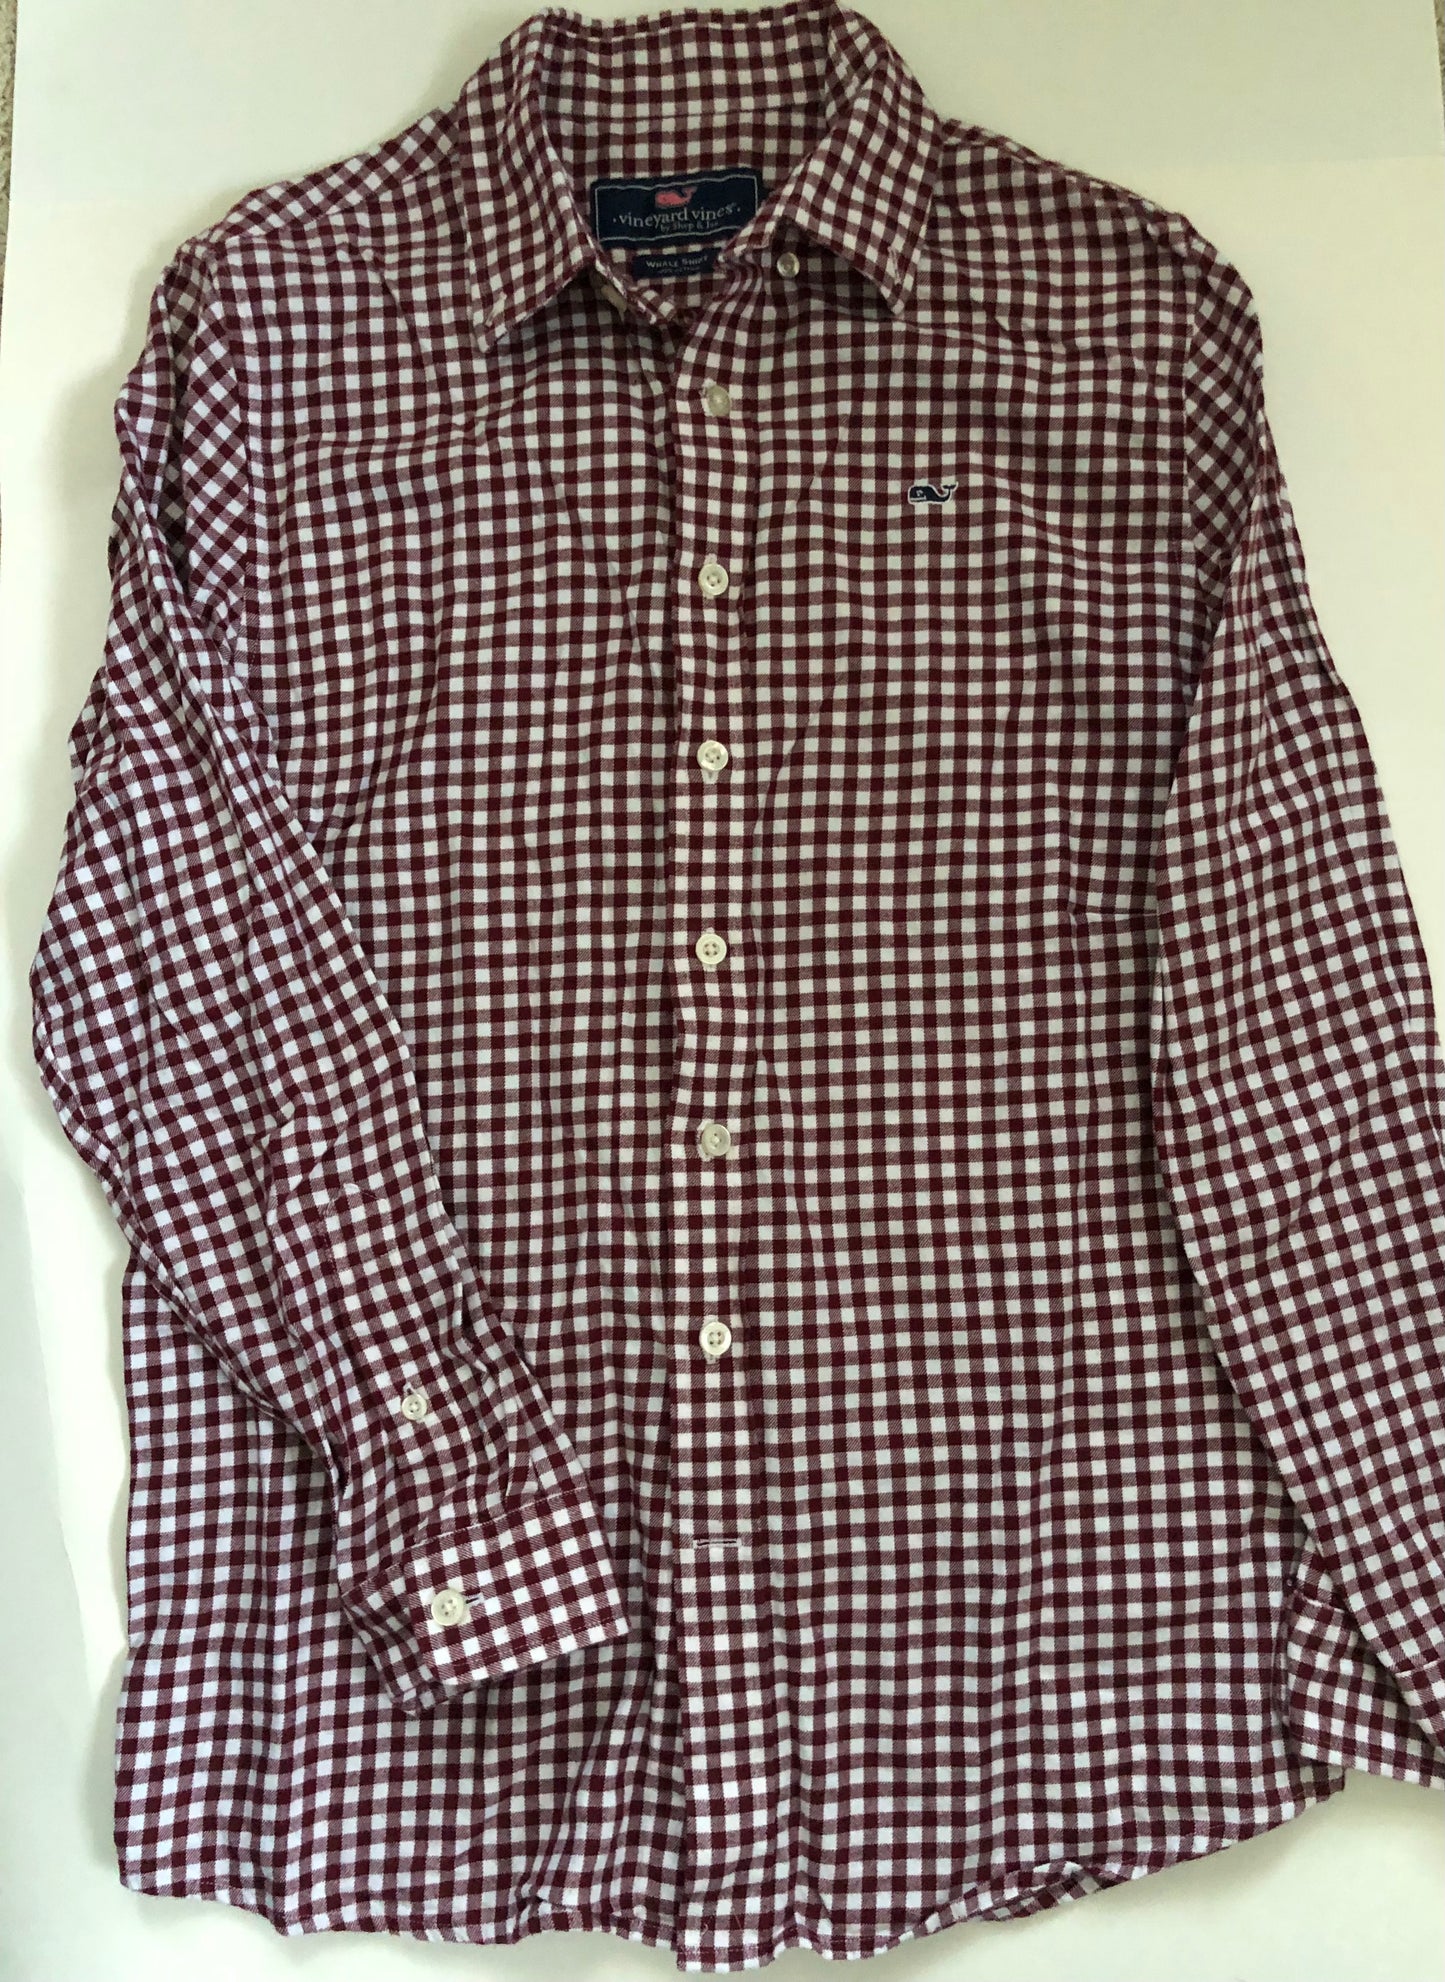 *Reduced* Y Large(16) Vineyard Vines Button Down Collared Dress Shirt- boy